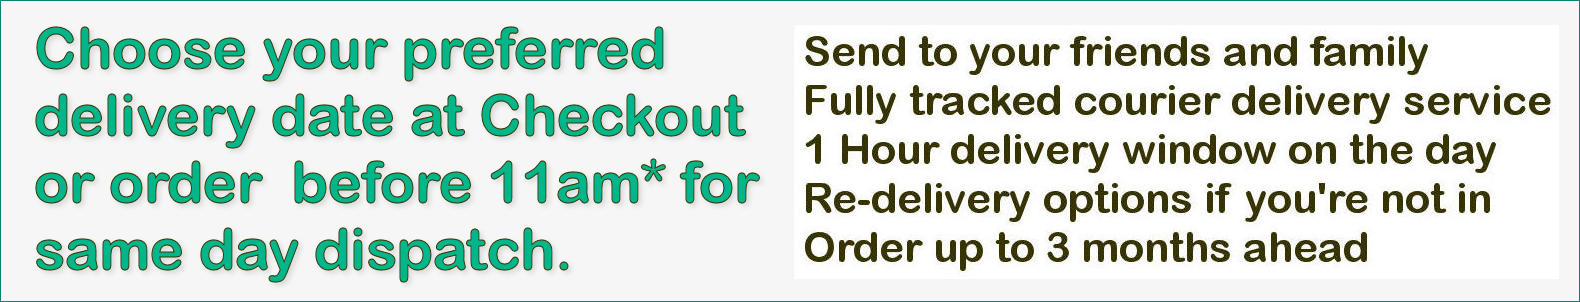 Choose delivery date at Checkout